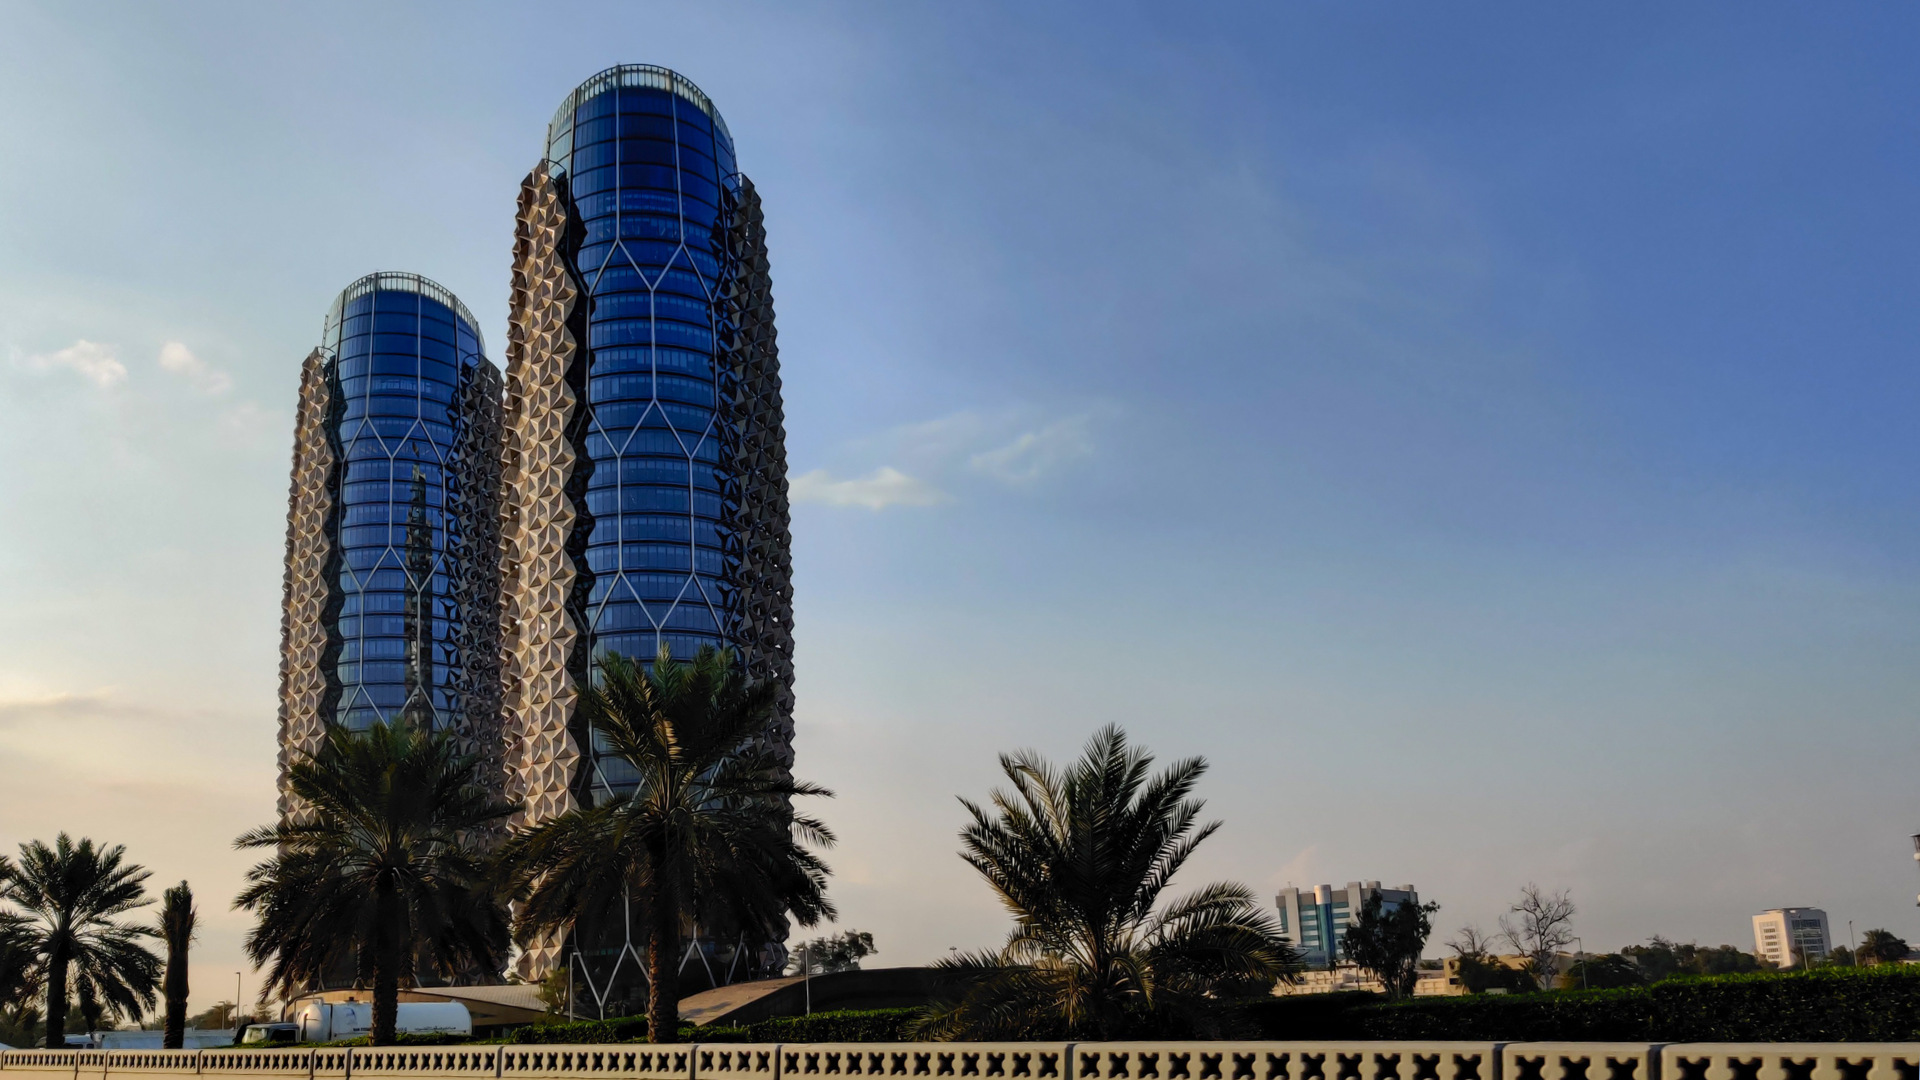 The Al Bahr Towers: Shaped By The Past